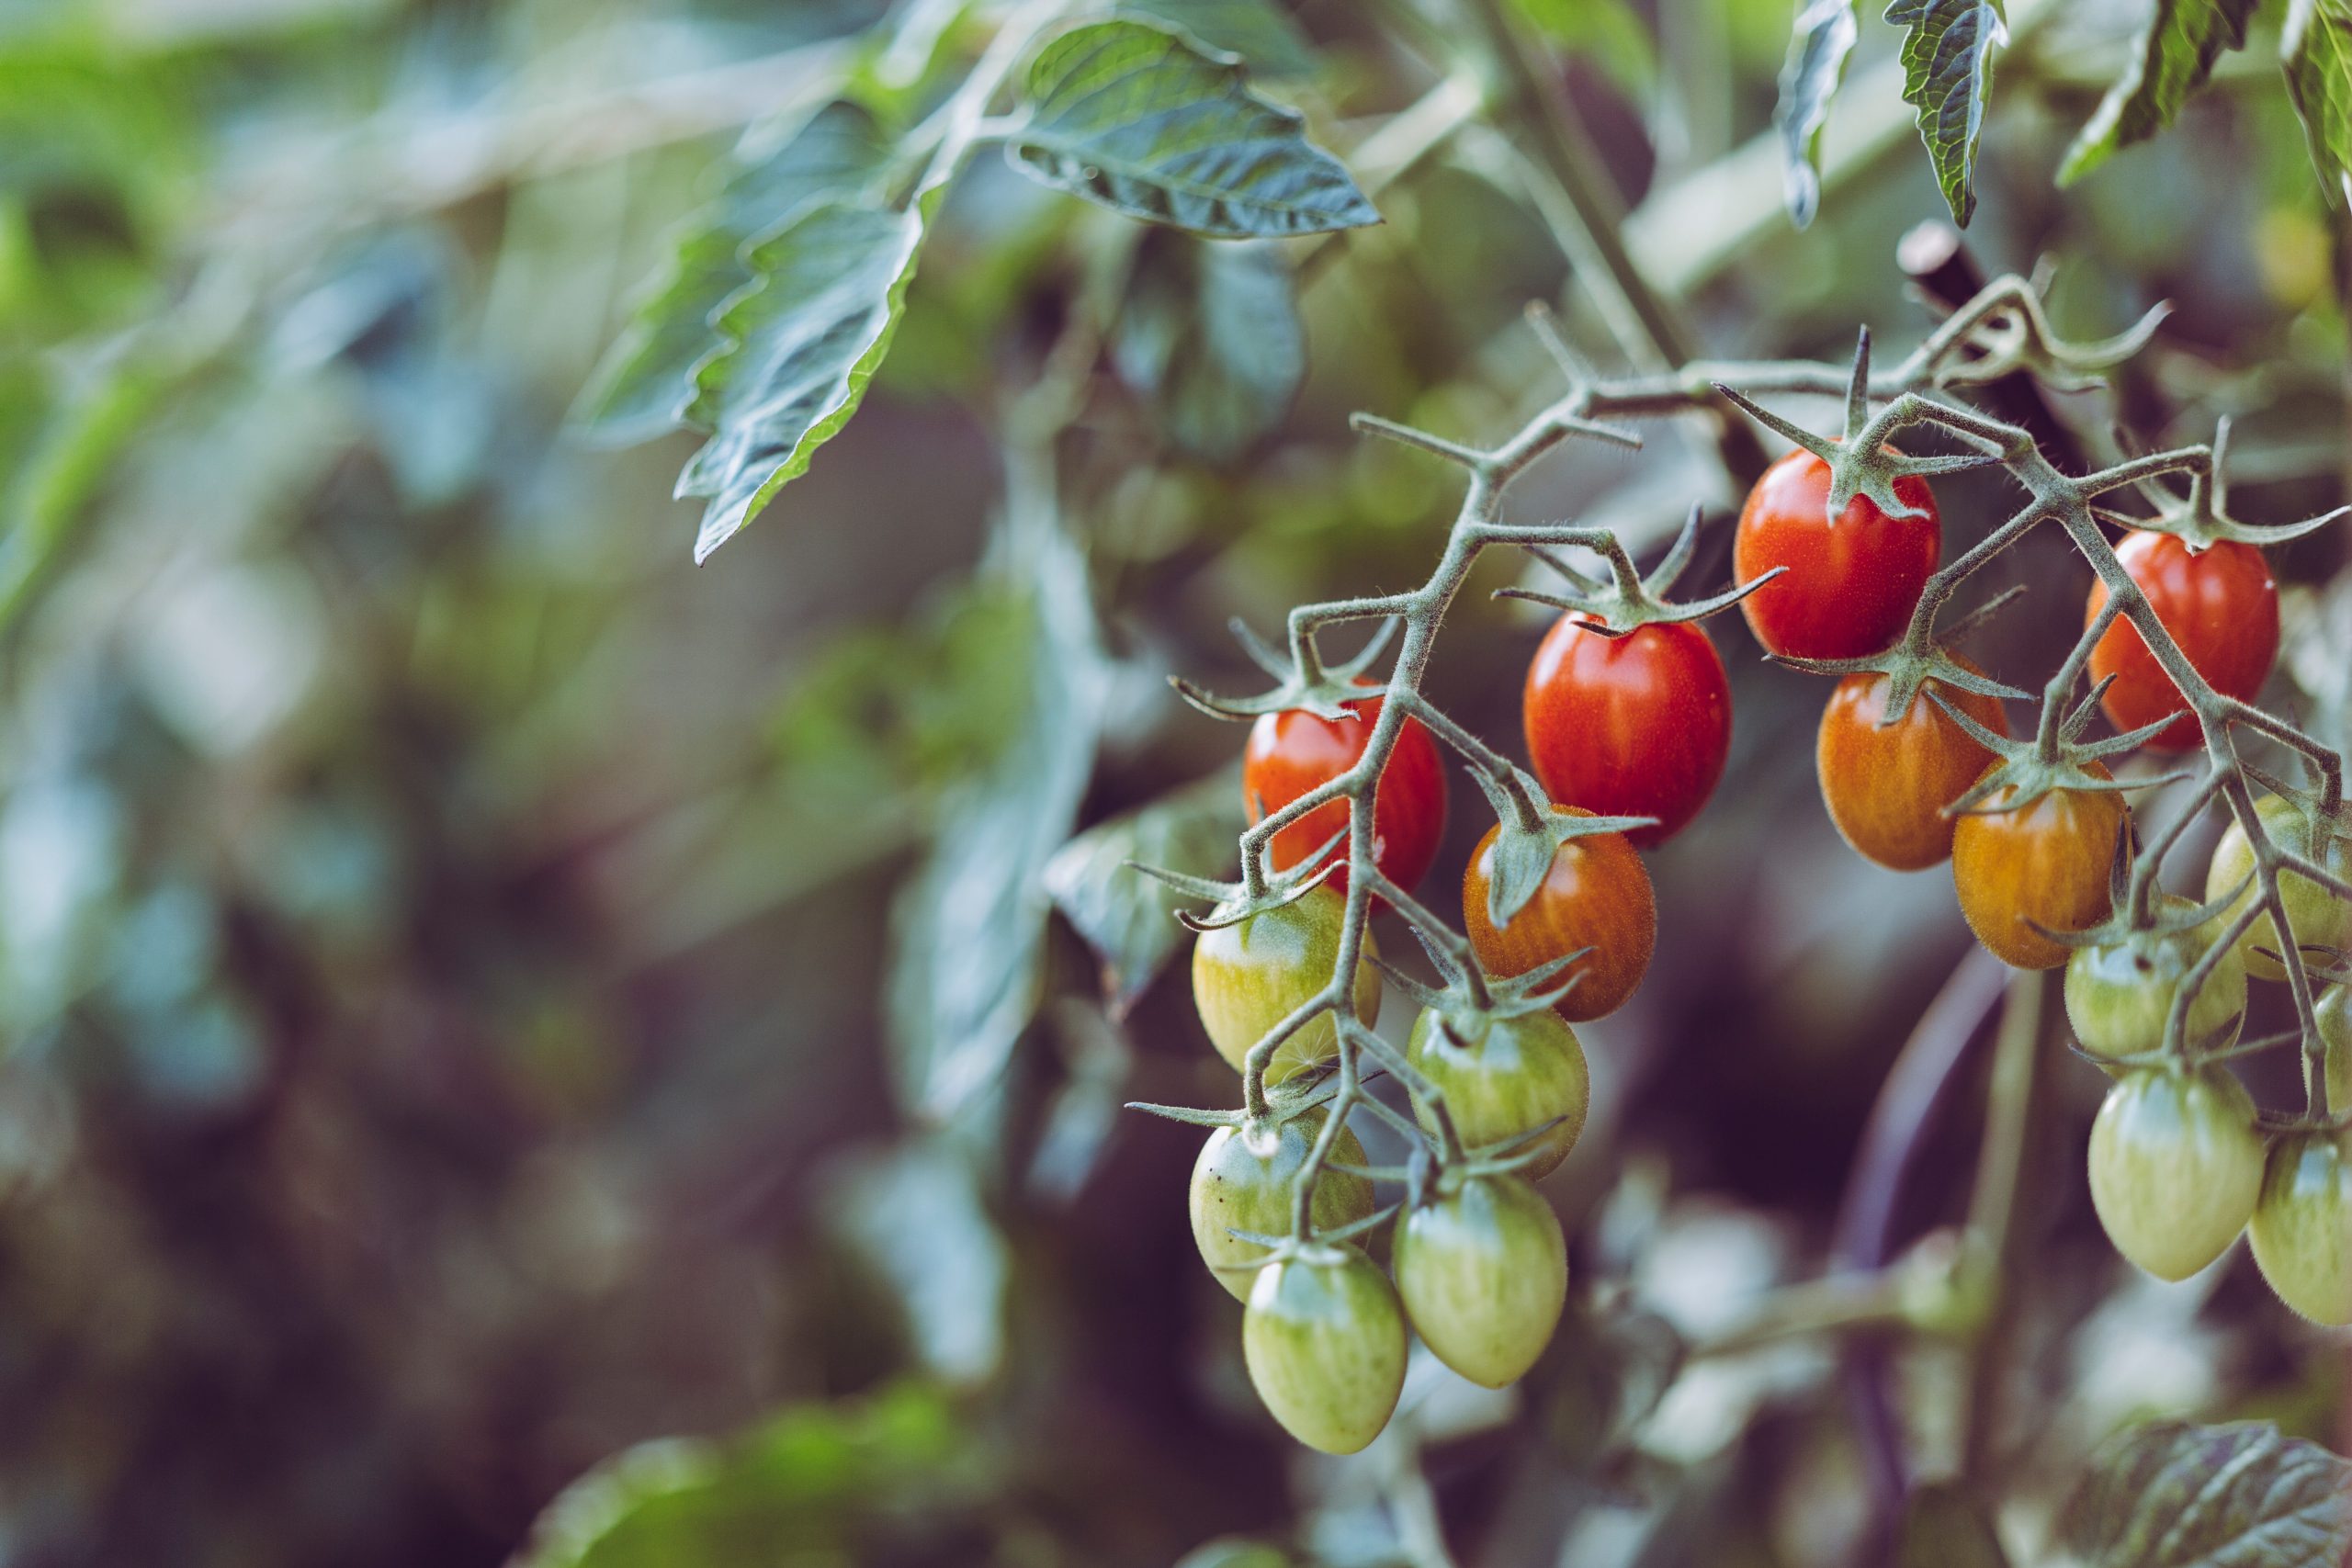 Do You Need To Prune Indeterminate Tomatoes?